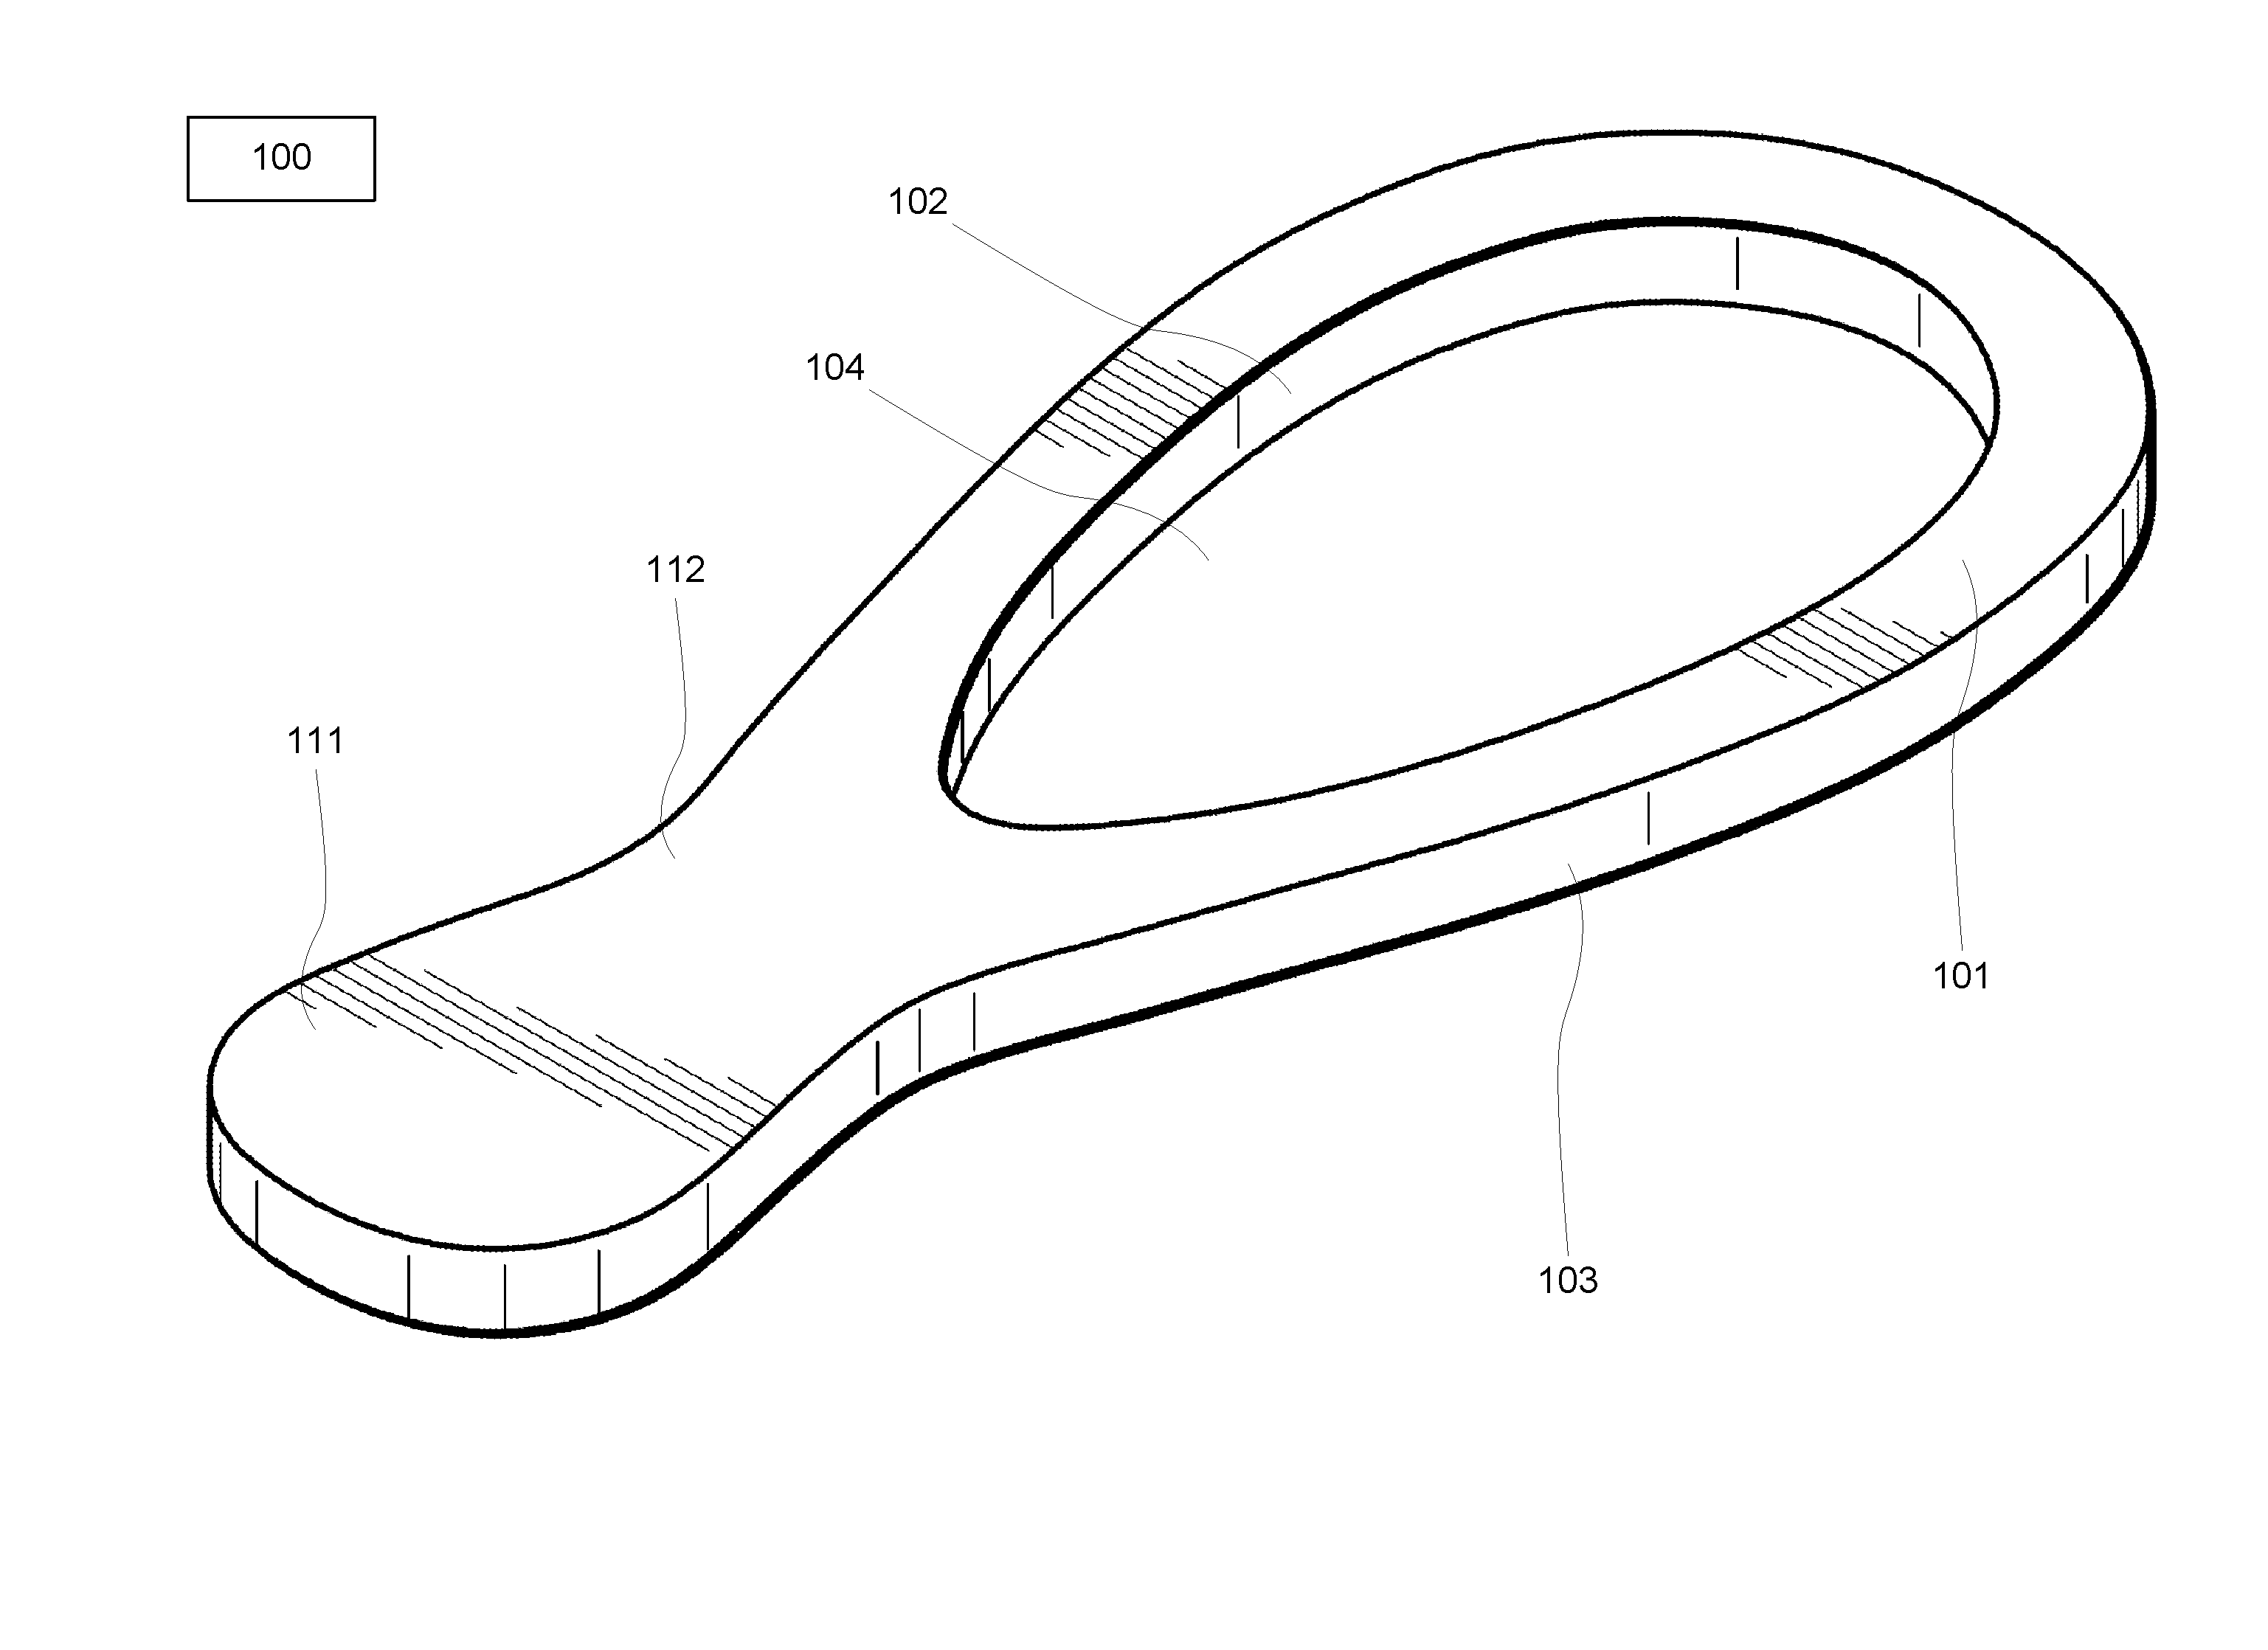 Systems and methods for holding an instrument pick